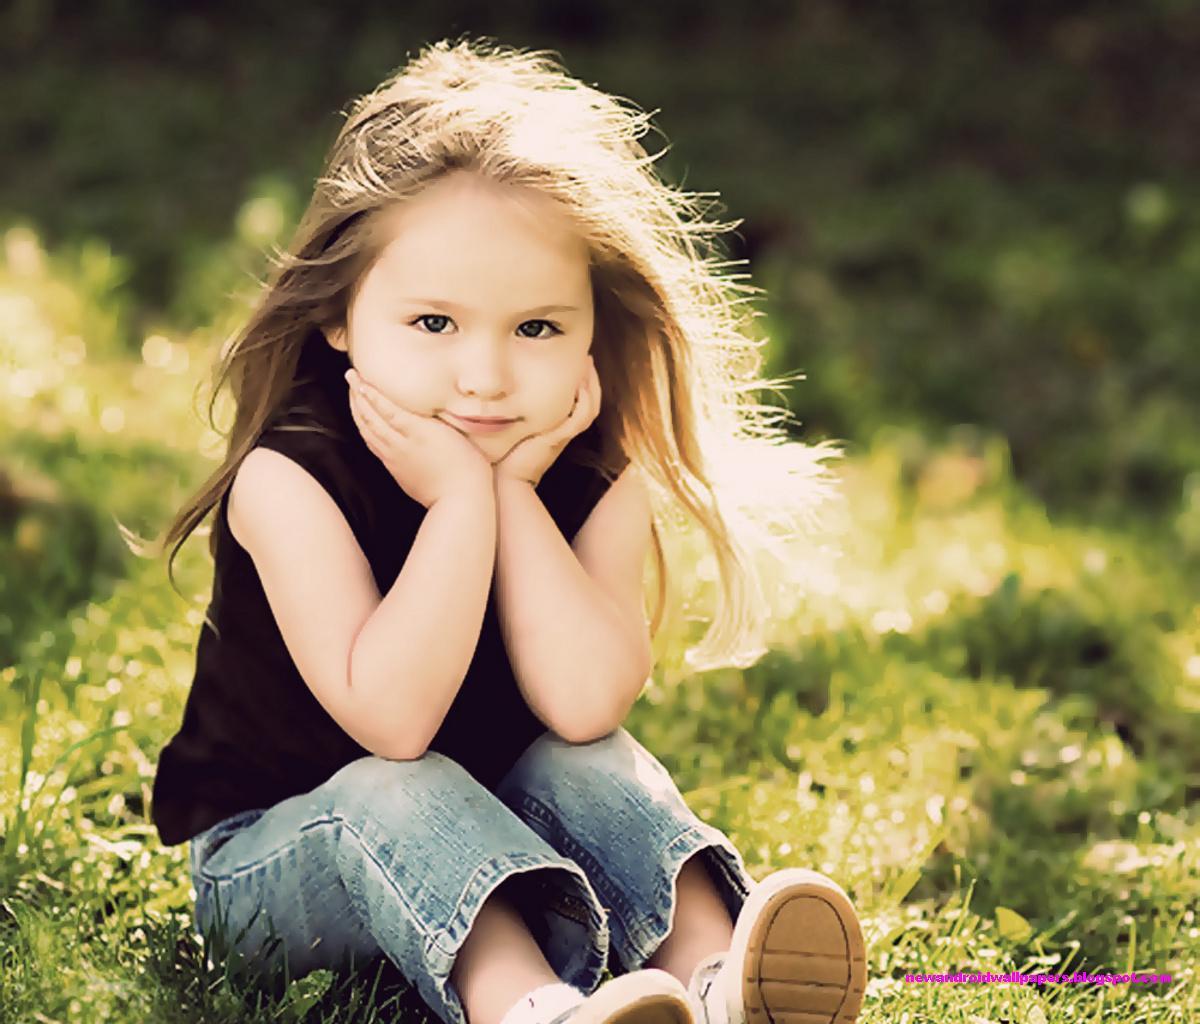 Cute And Nice Baby Wallpaper In High Quality Free Download